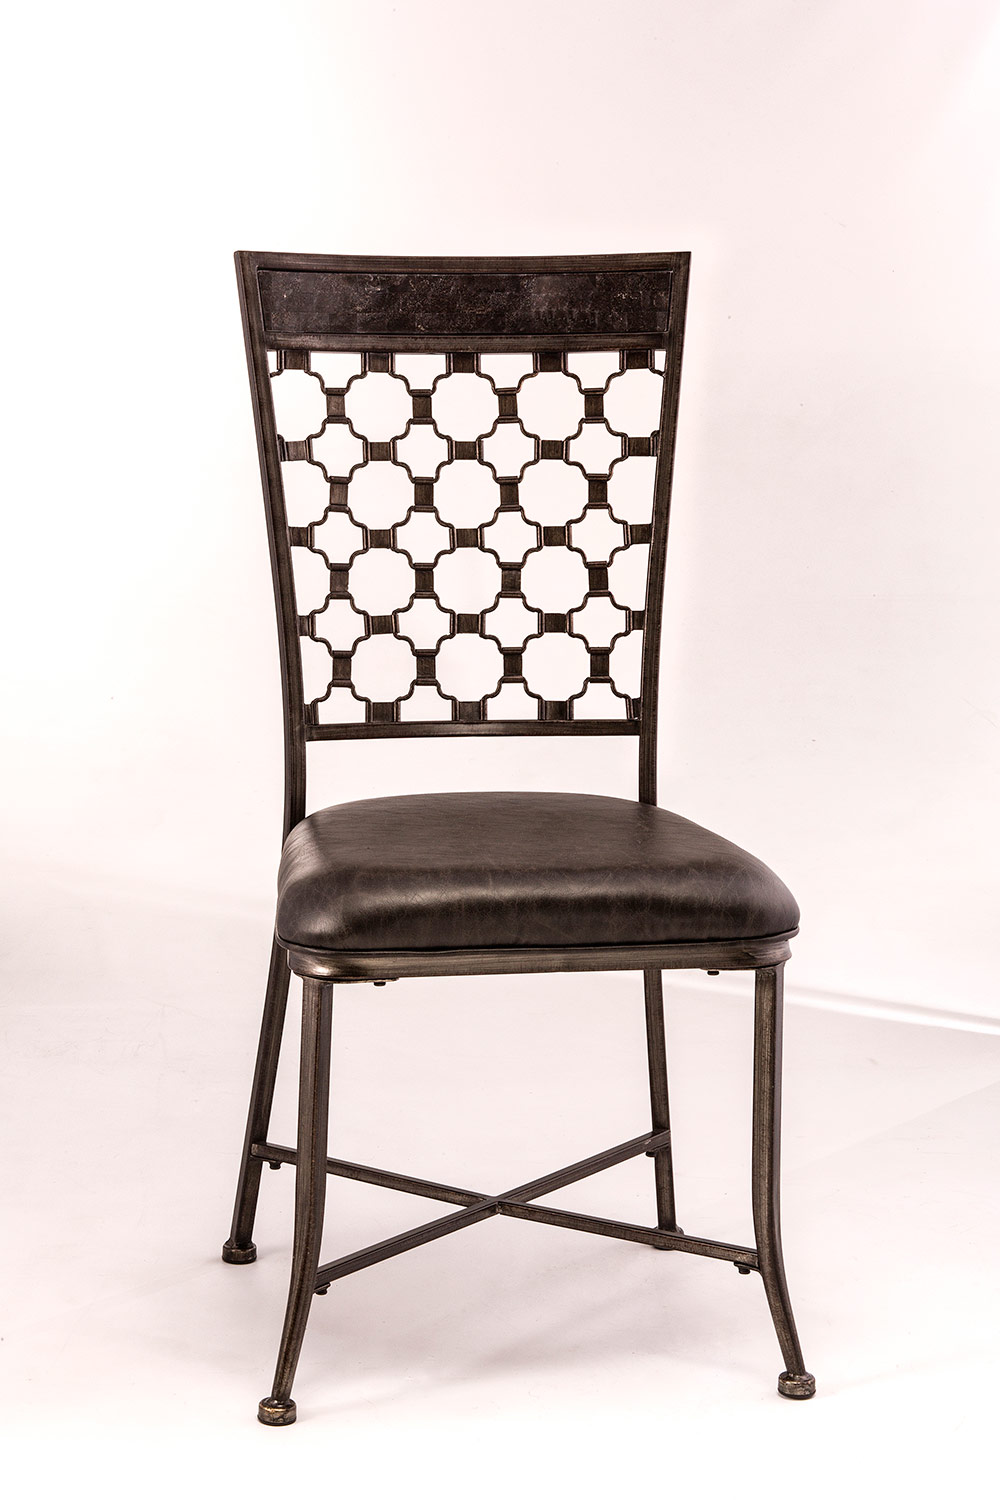 Hillsdale Brescello Dining Chair - Charcoal/Blue Stone